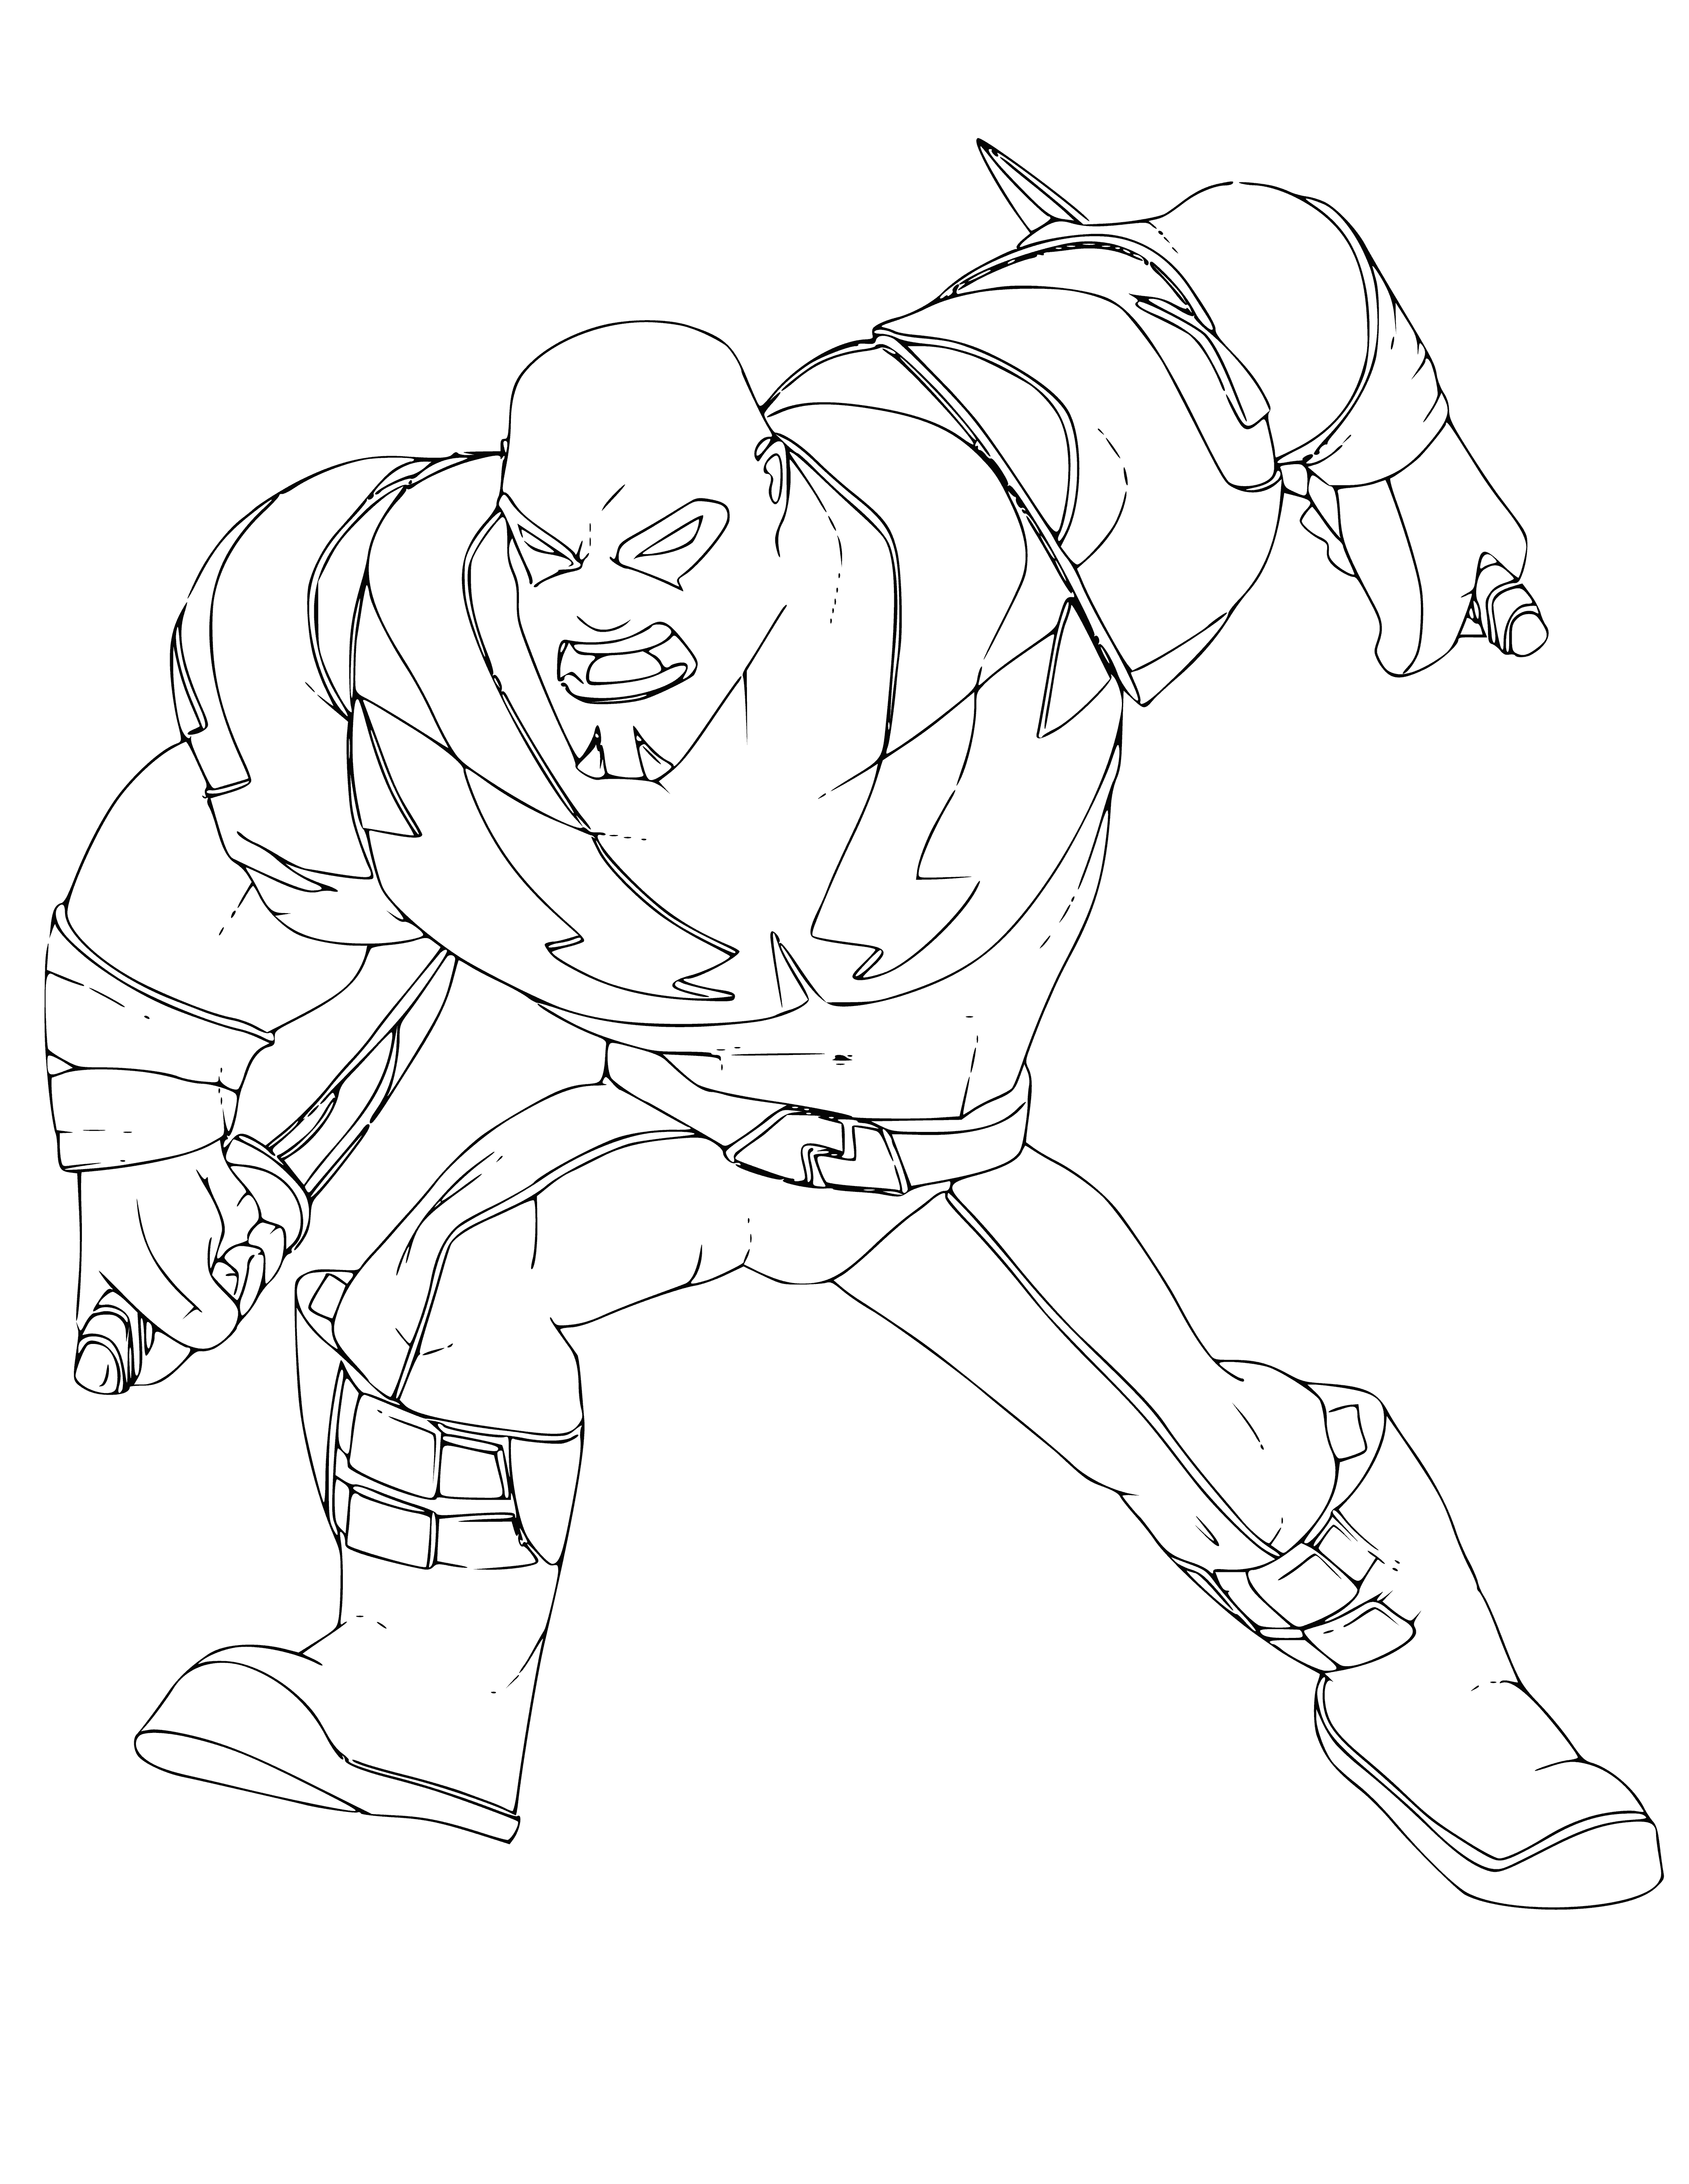 coloring page: Man with green skin and tattoos points at something with a serious look. No shirt on, mohawk.